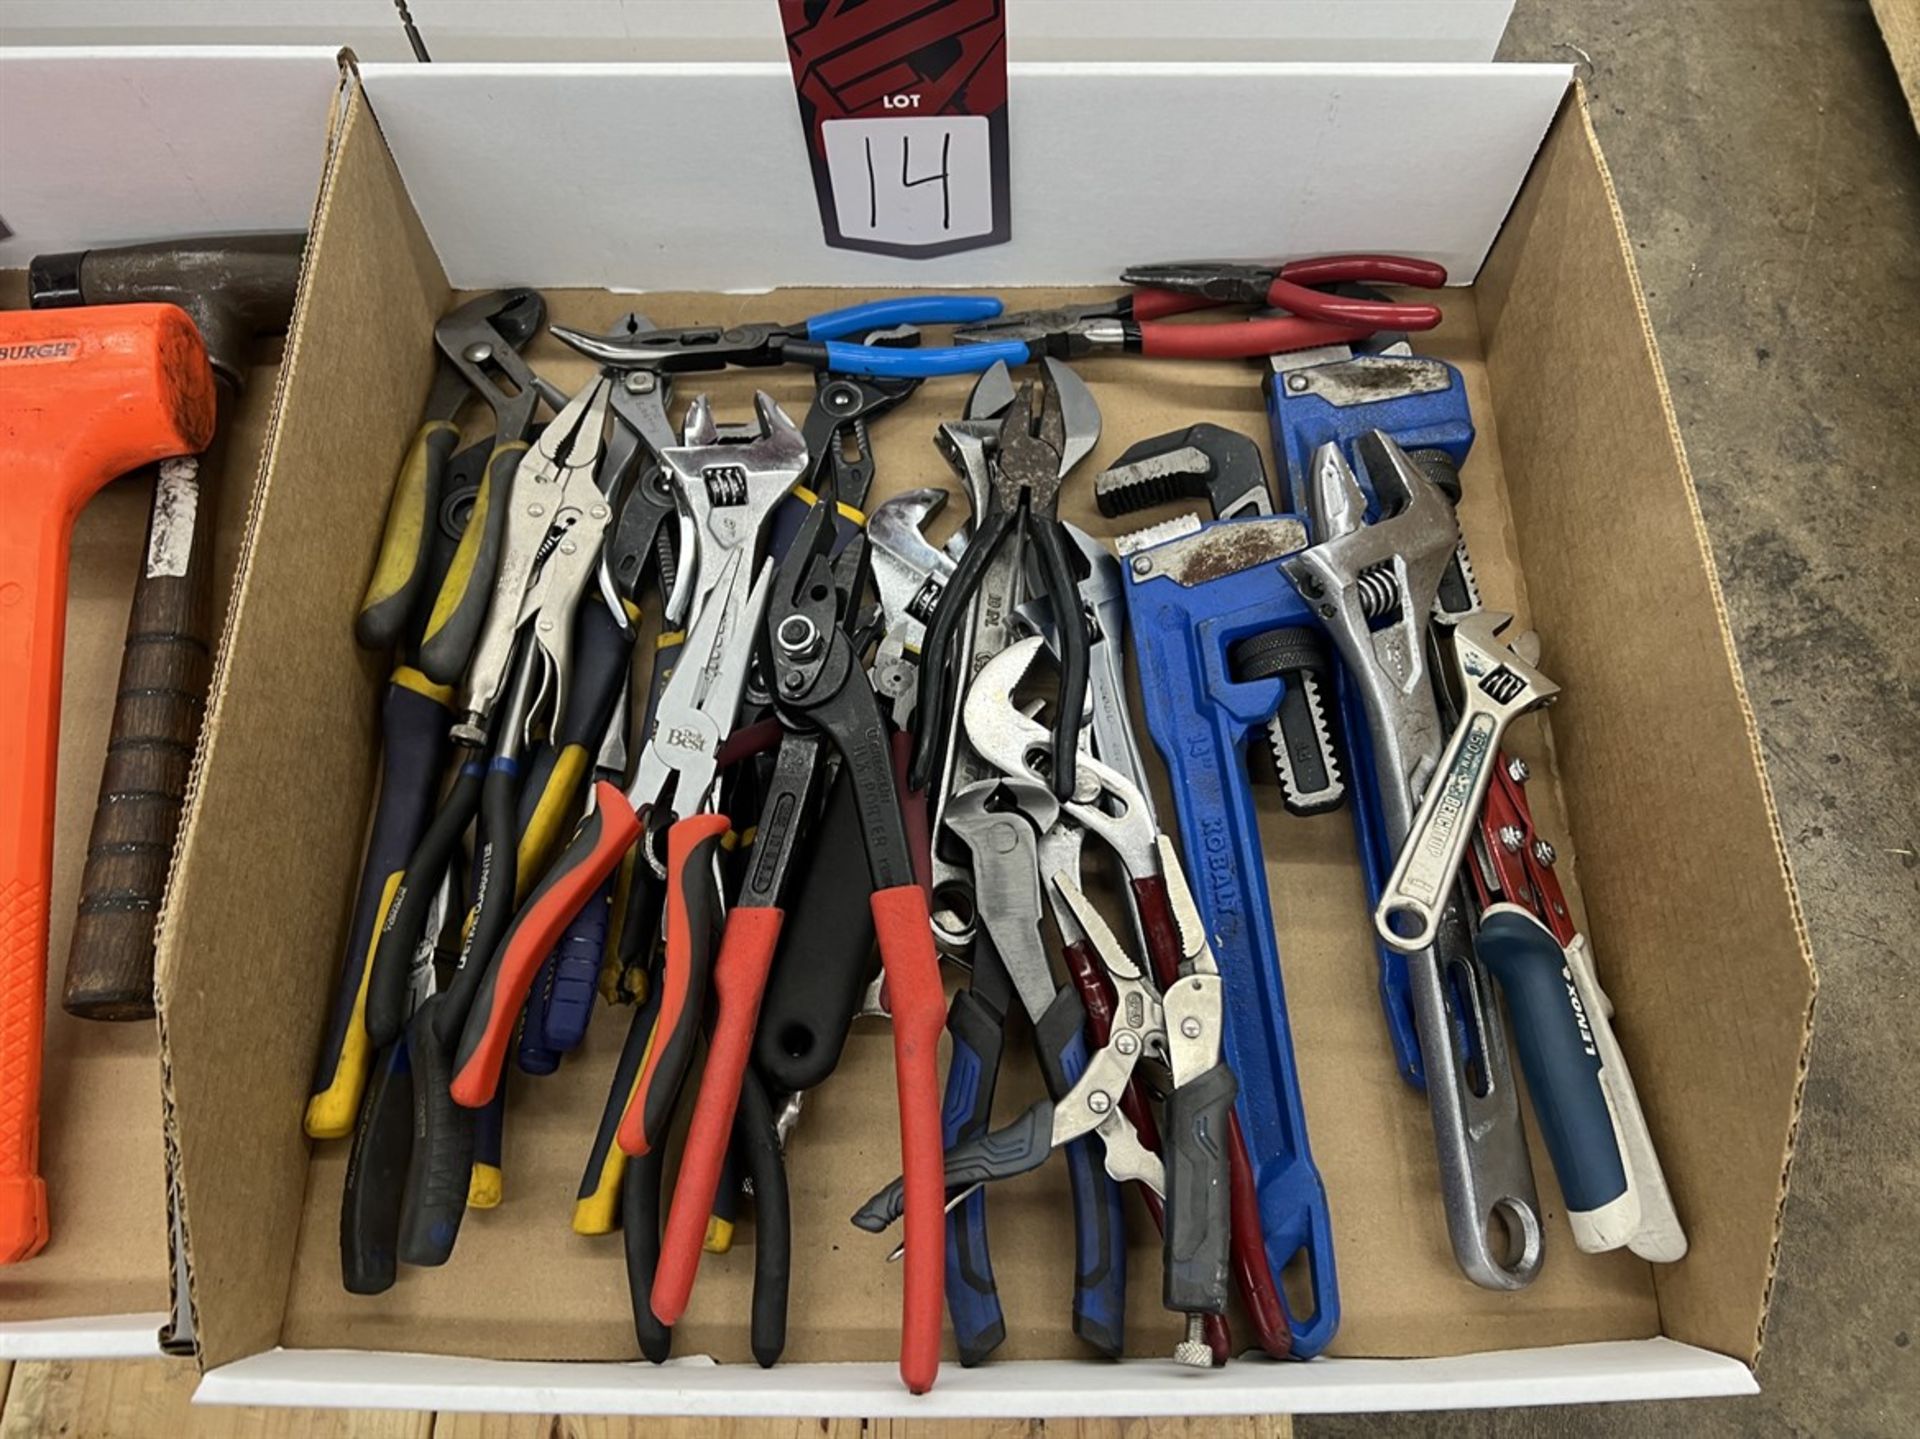 Lot Comprising Pipe Wrenches, Adjustable Wrenches, Pliers and Vise Grips